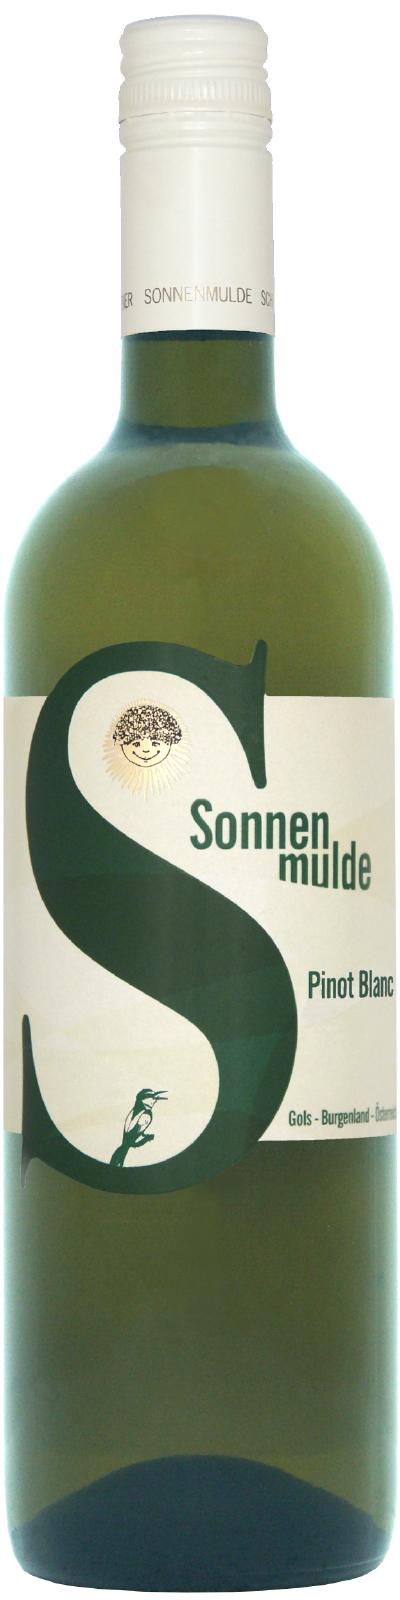 A bottle of Pinot Blanc Barrique